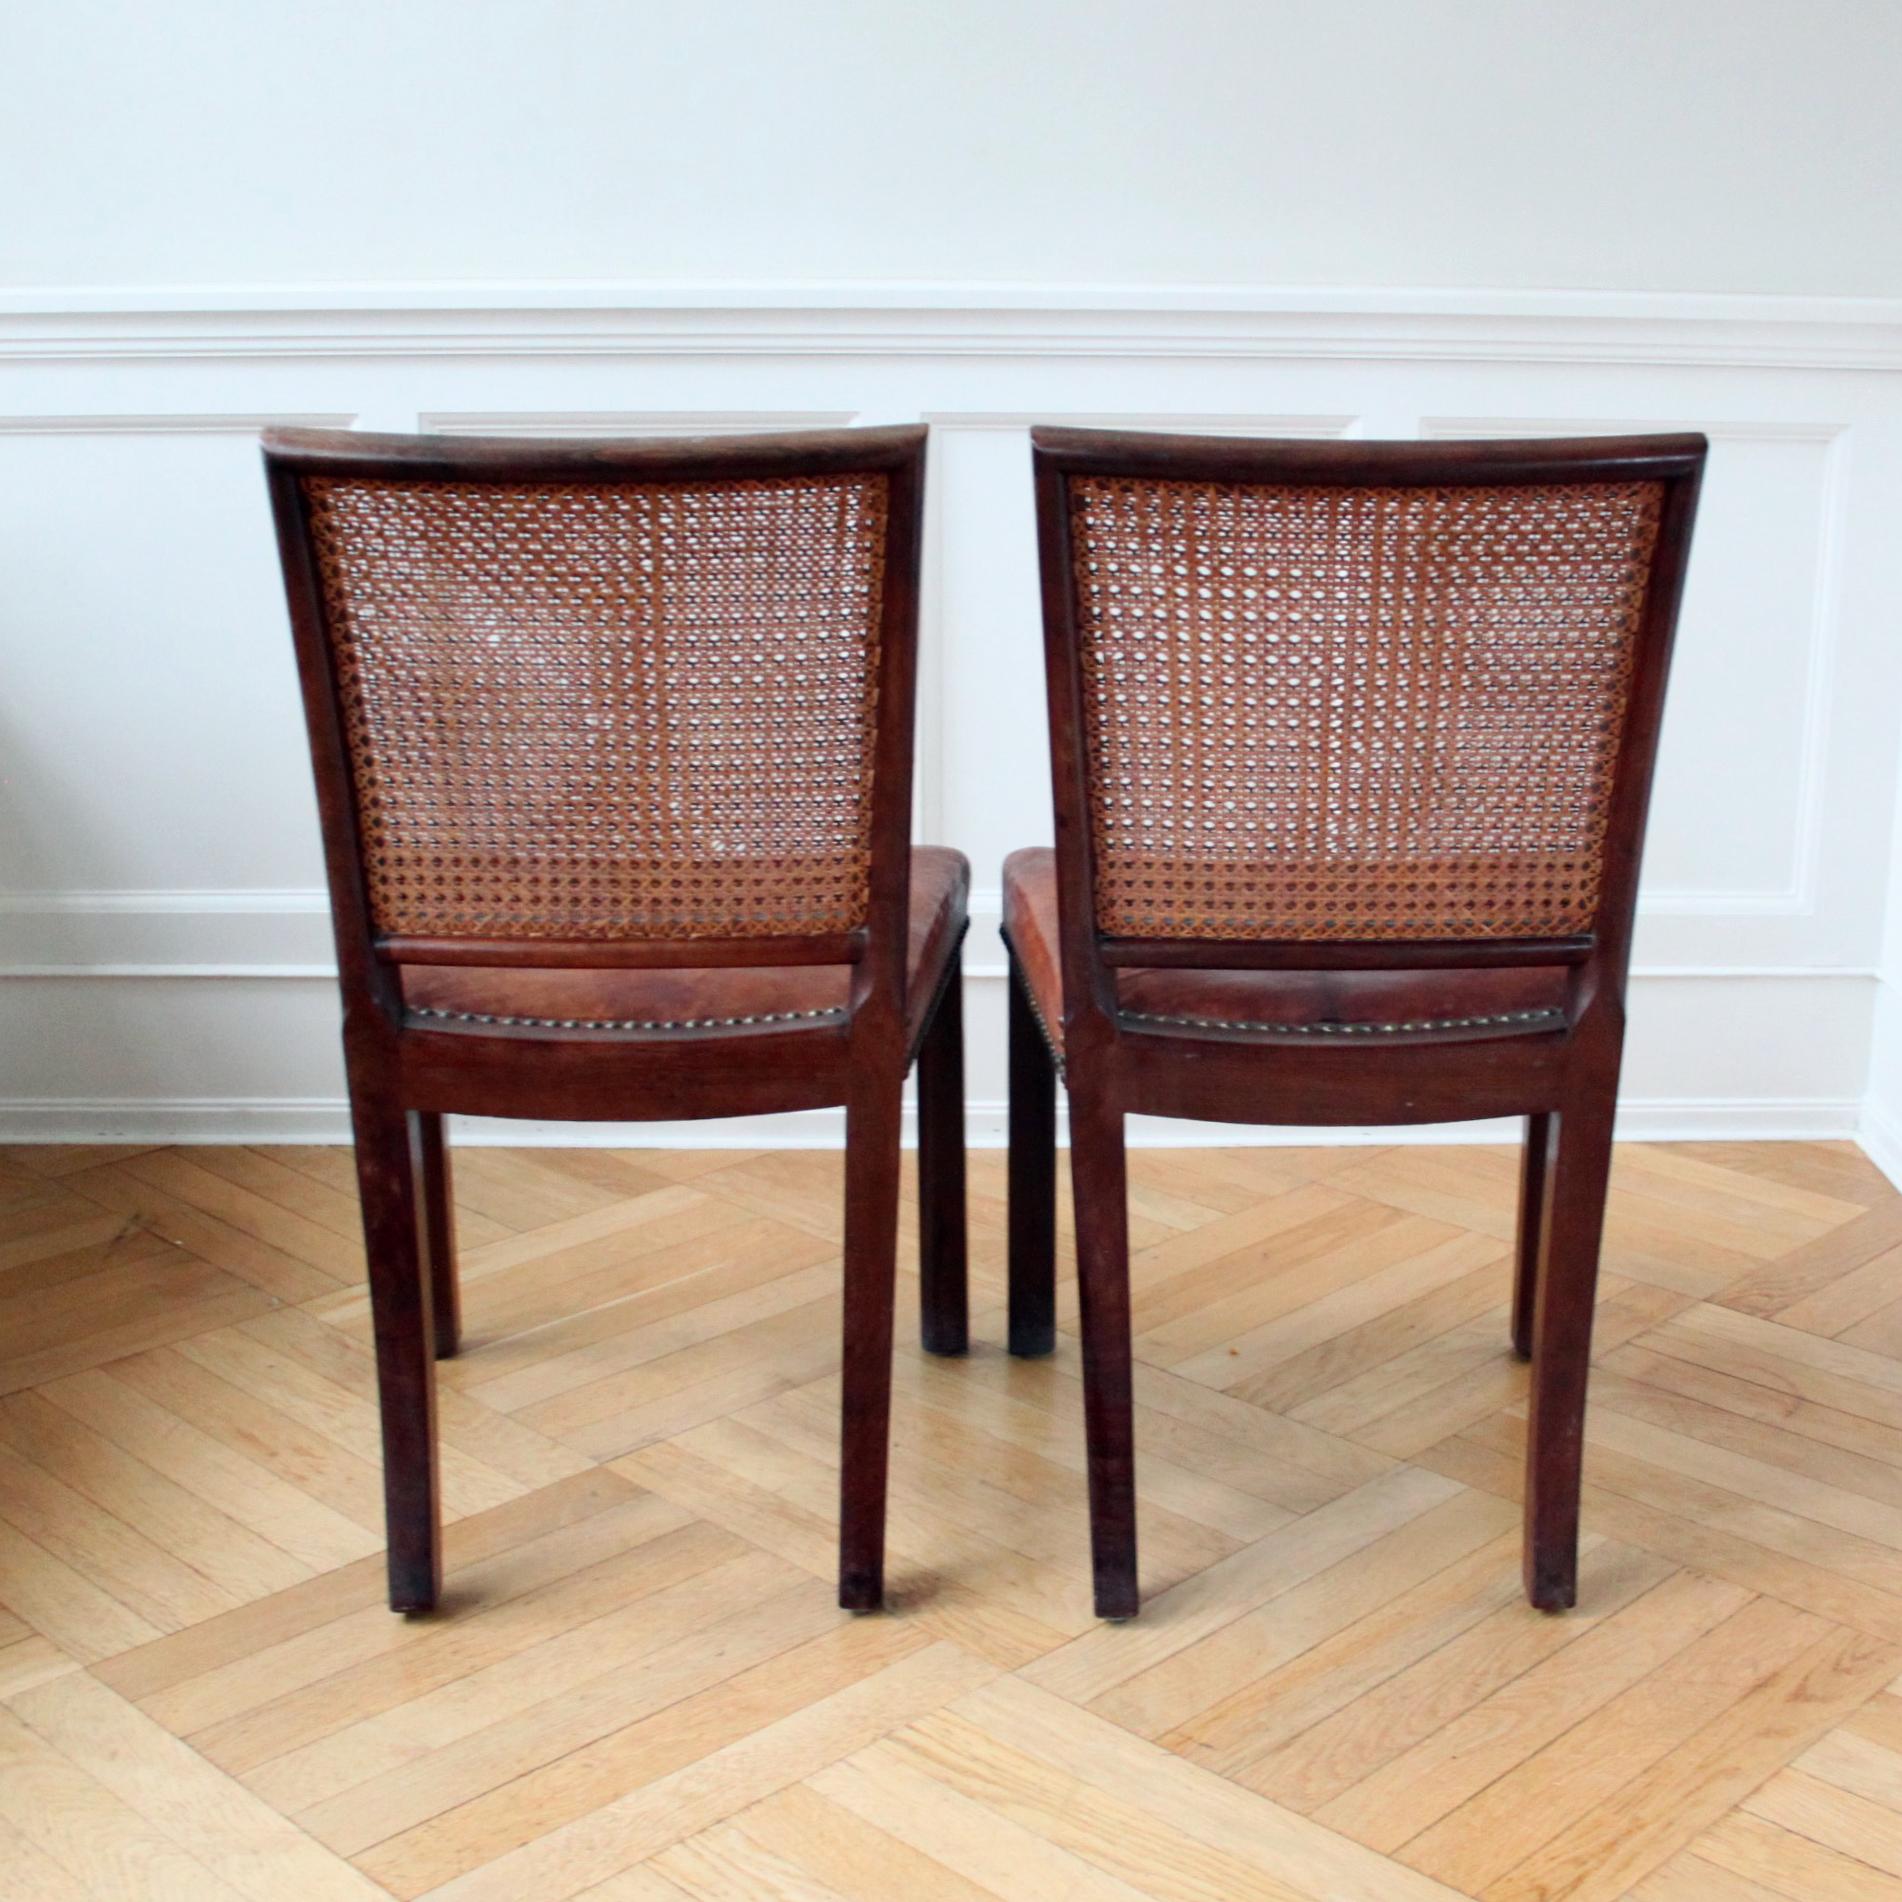 Scandinavian Modern Rare pair of Mahogany, Niger Leather and Woven Cane Chairs, Denmark 1930s For Sale